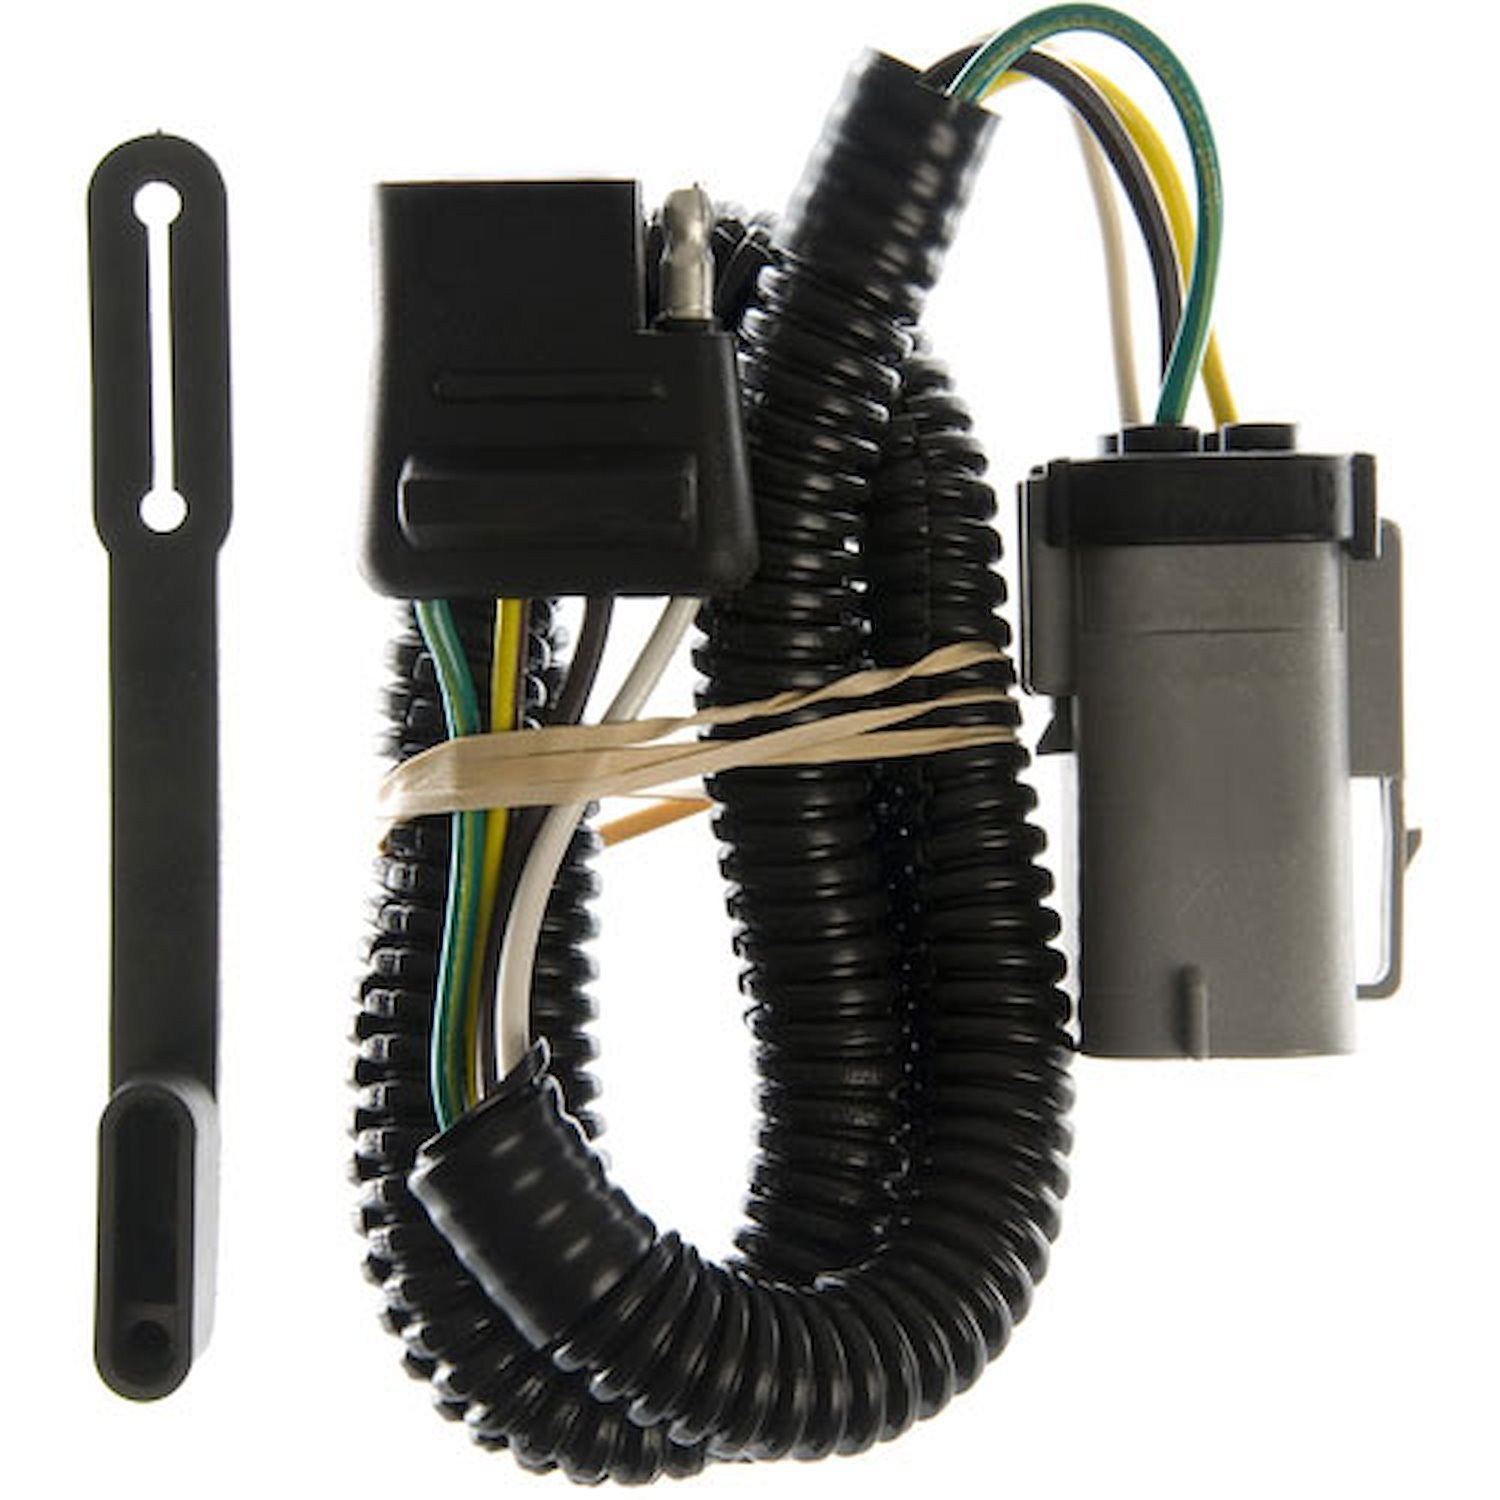 T-Connector / 2 Wire Electrical System 2002-04 Ford F-250/F-350/F-450/F-550 Super Duty Pickup